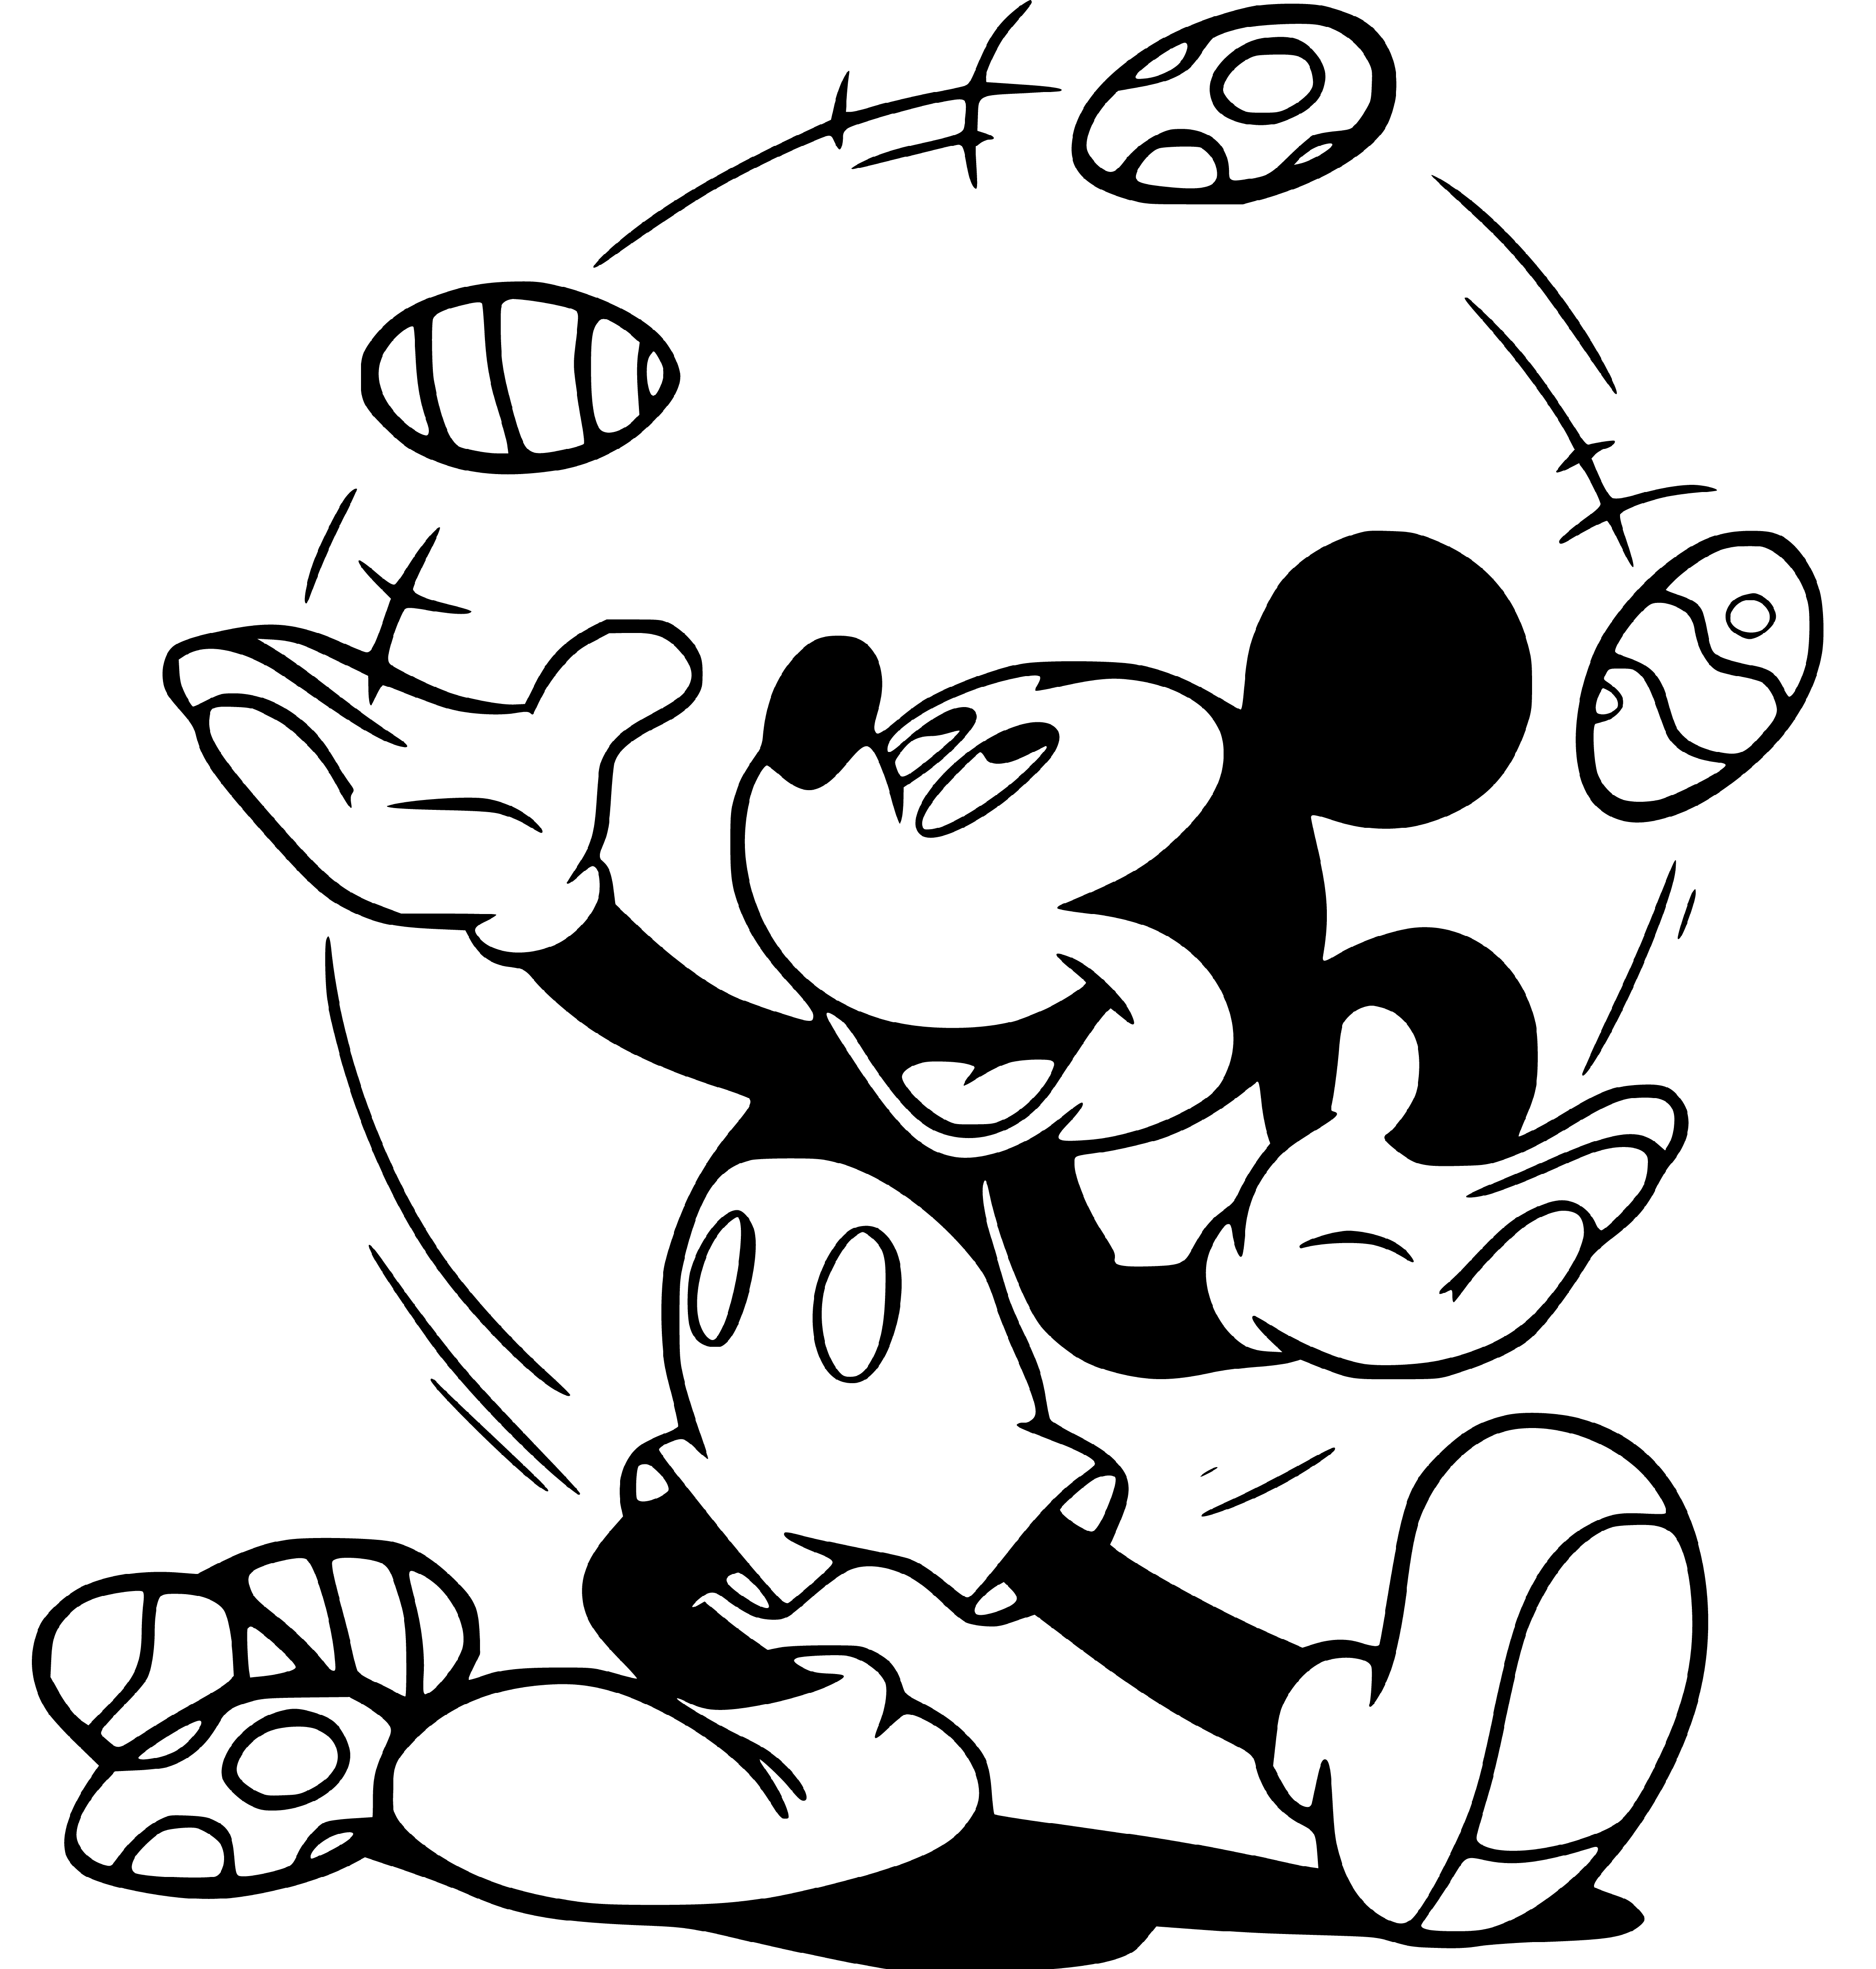 Printable Mickey Mouse Juggling Easter Eggs Coloring Page for kids.